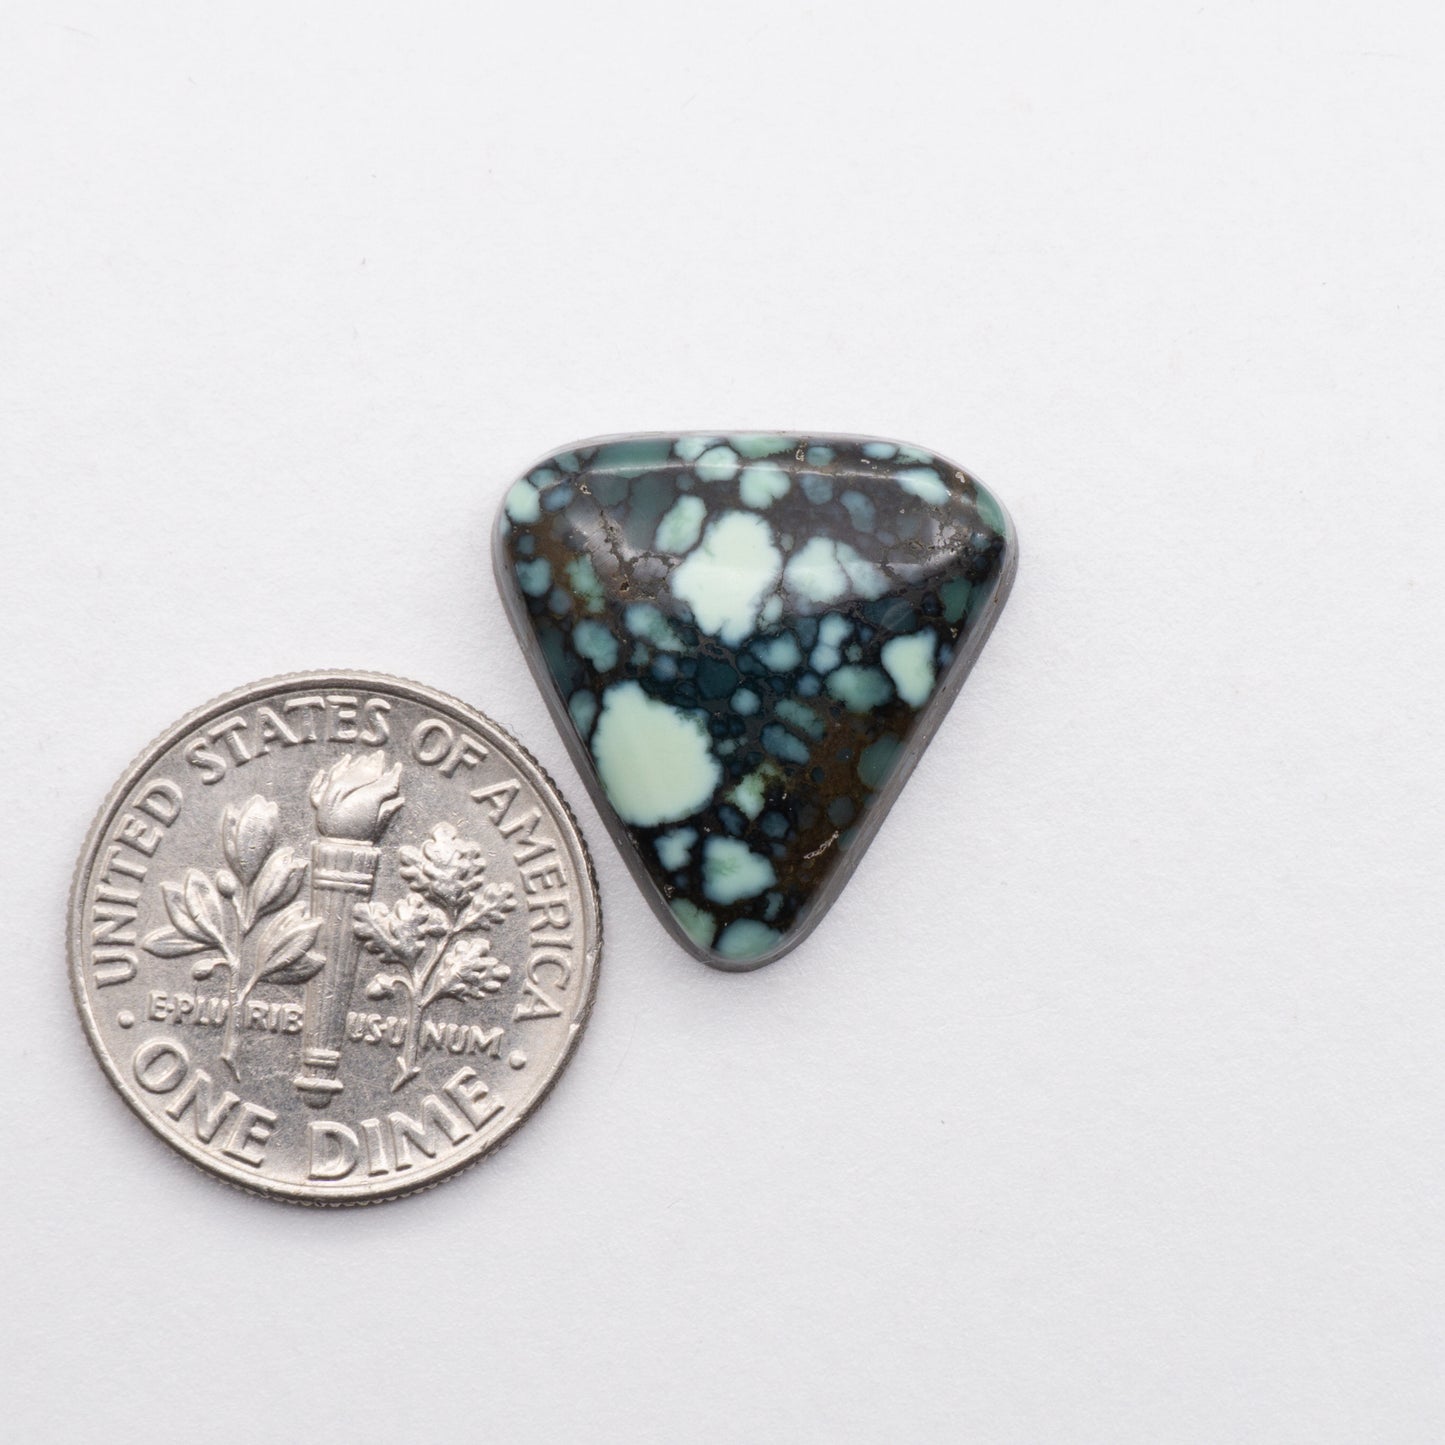 This Nevada Variscite Cabochon lot has a glossy finish and is backed for added strength. Mined in Nevada, USA. Similar to turquoise, used for jewelry making.